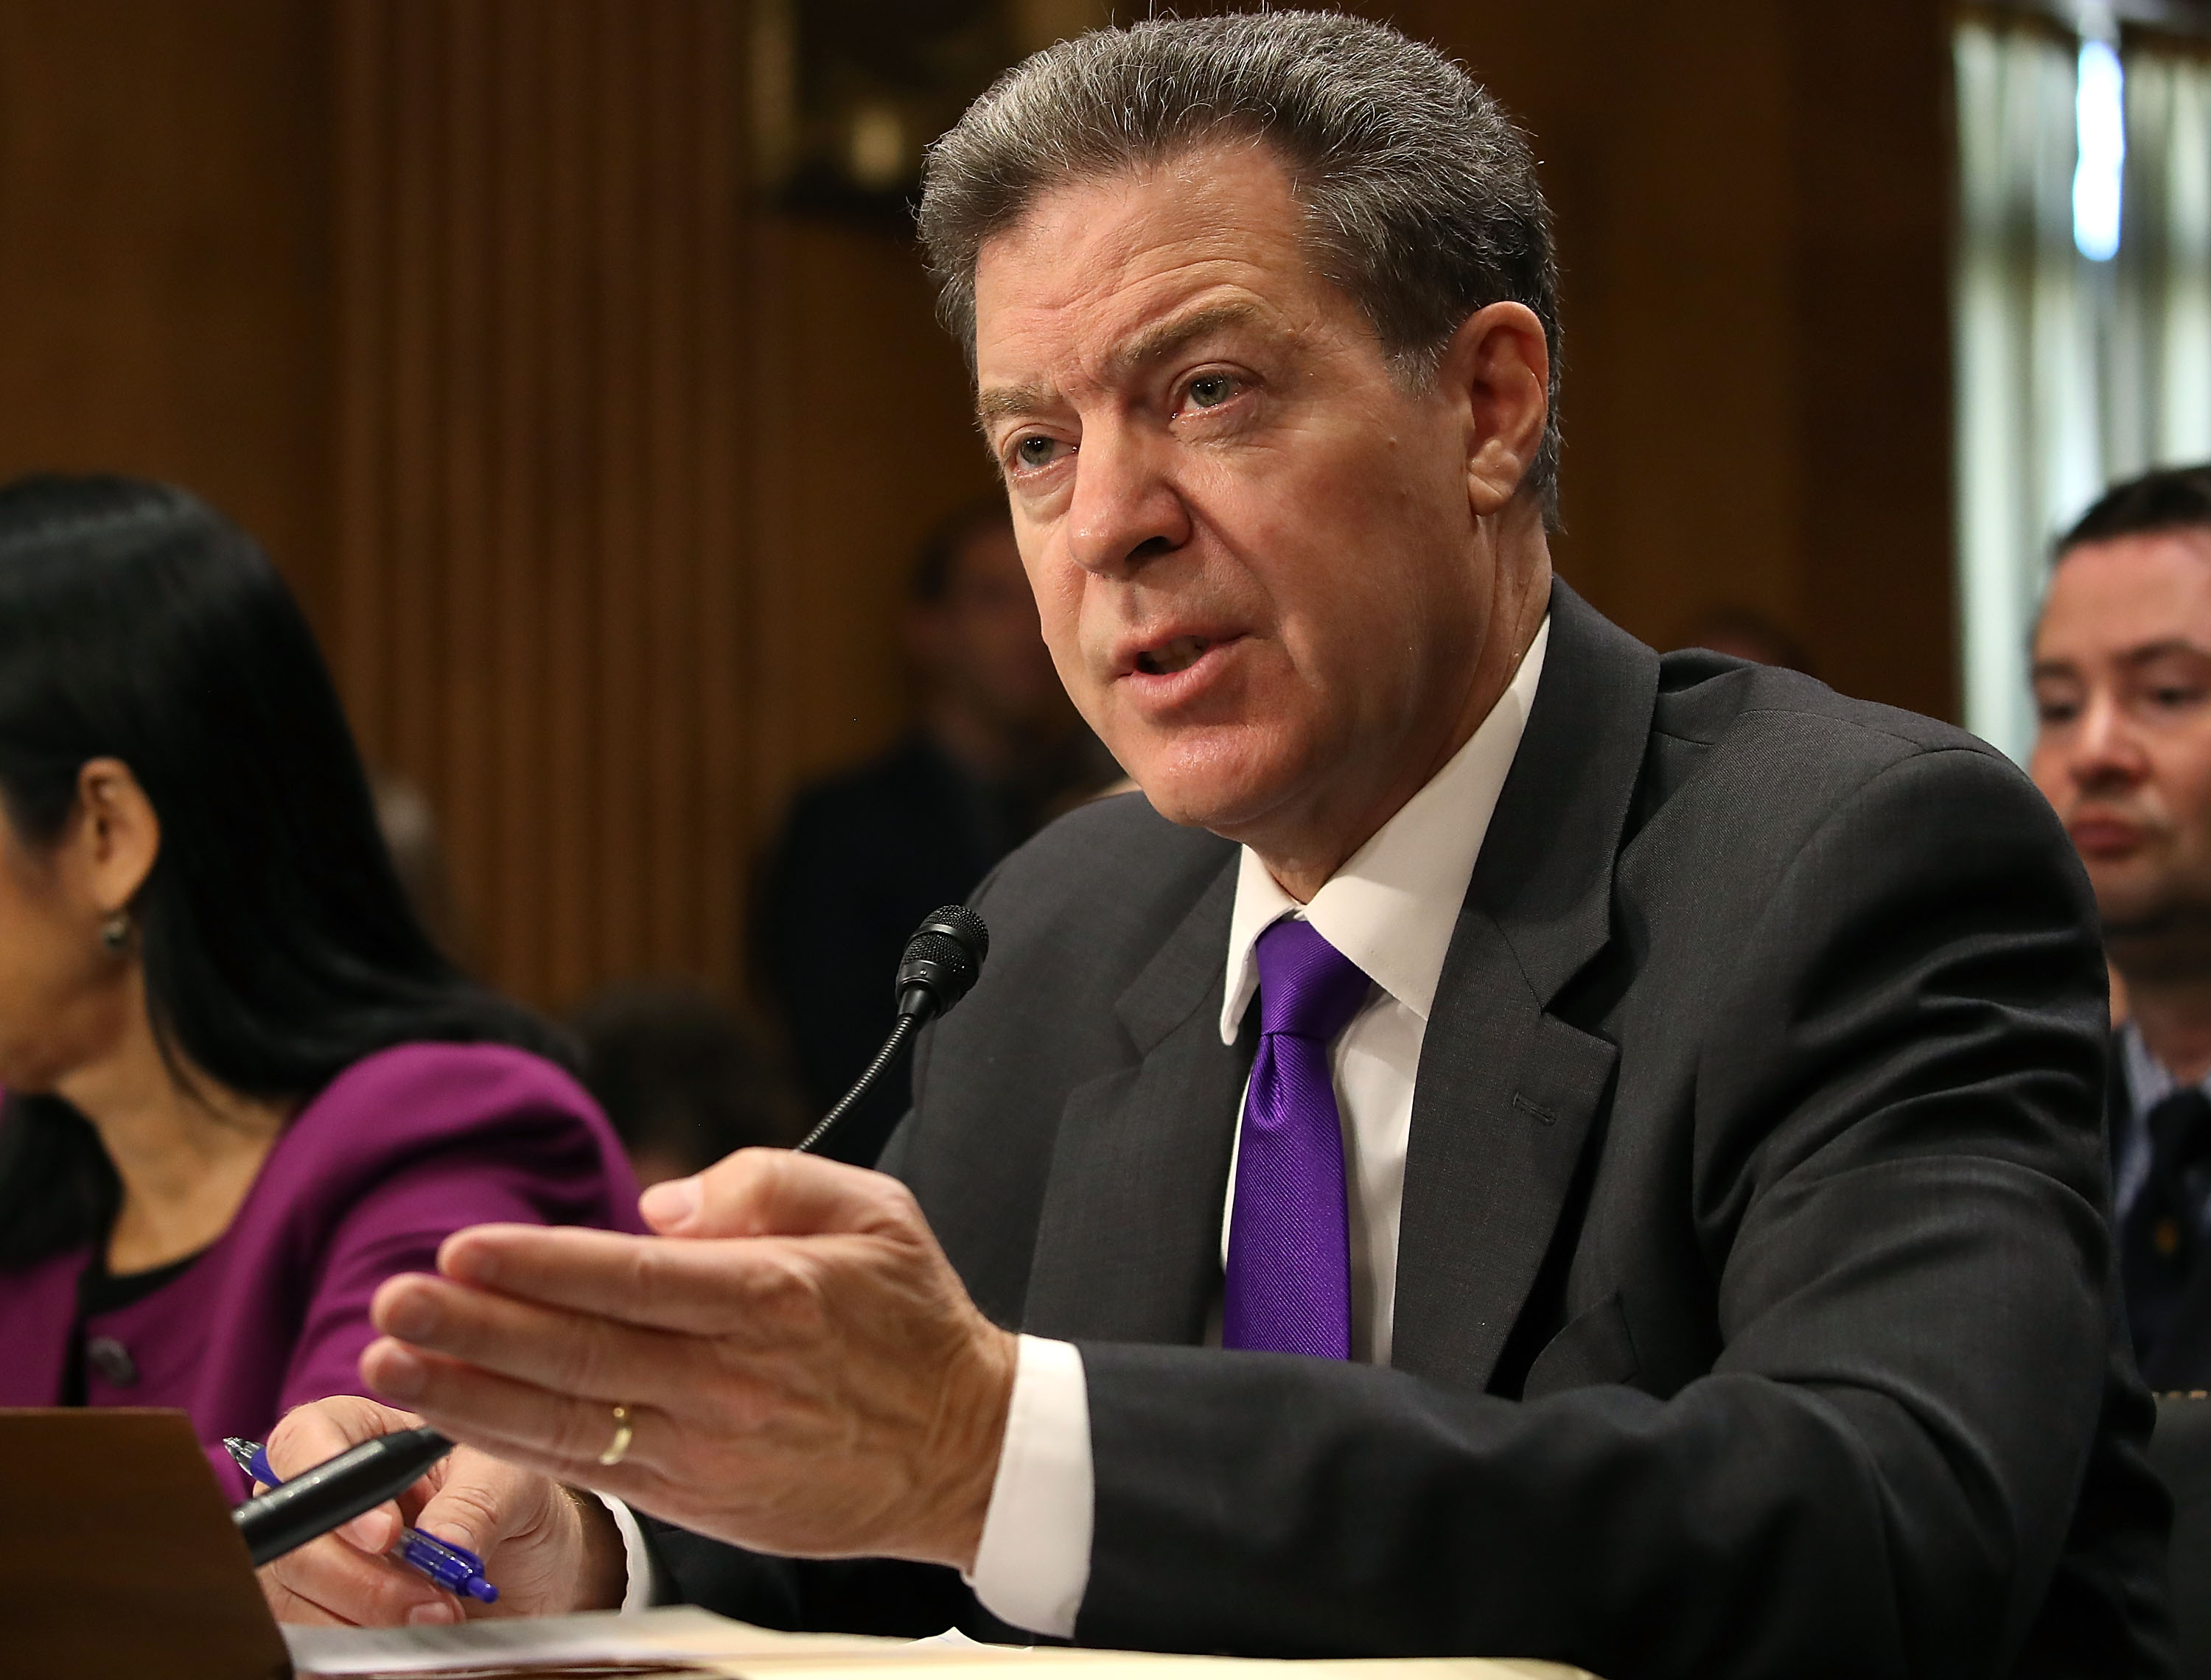 Senate Committee Holds Nomination Hearing For Samuel Dale Brownback To Be Ambassador Of Int'l Religious Freedom